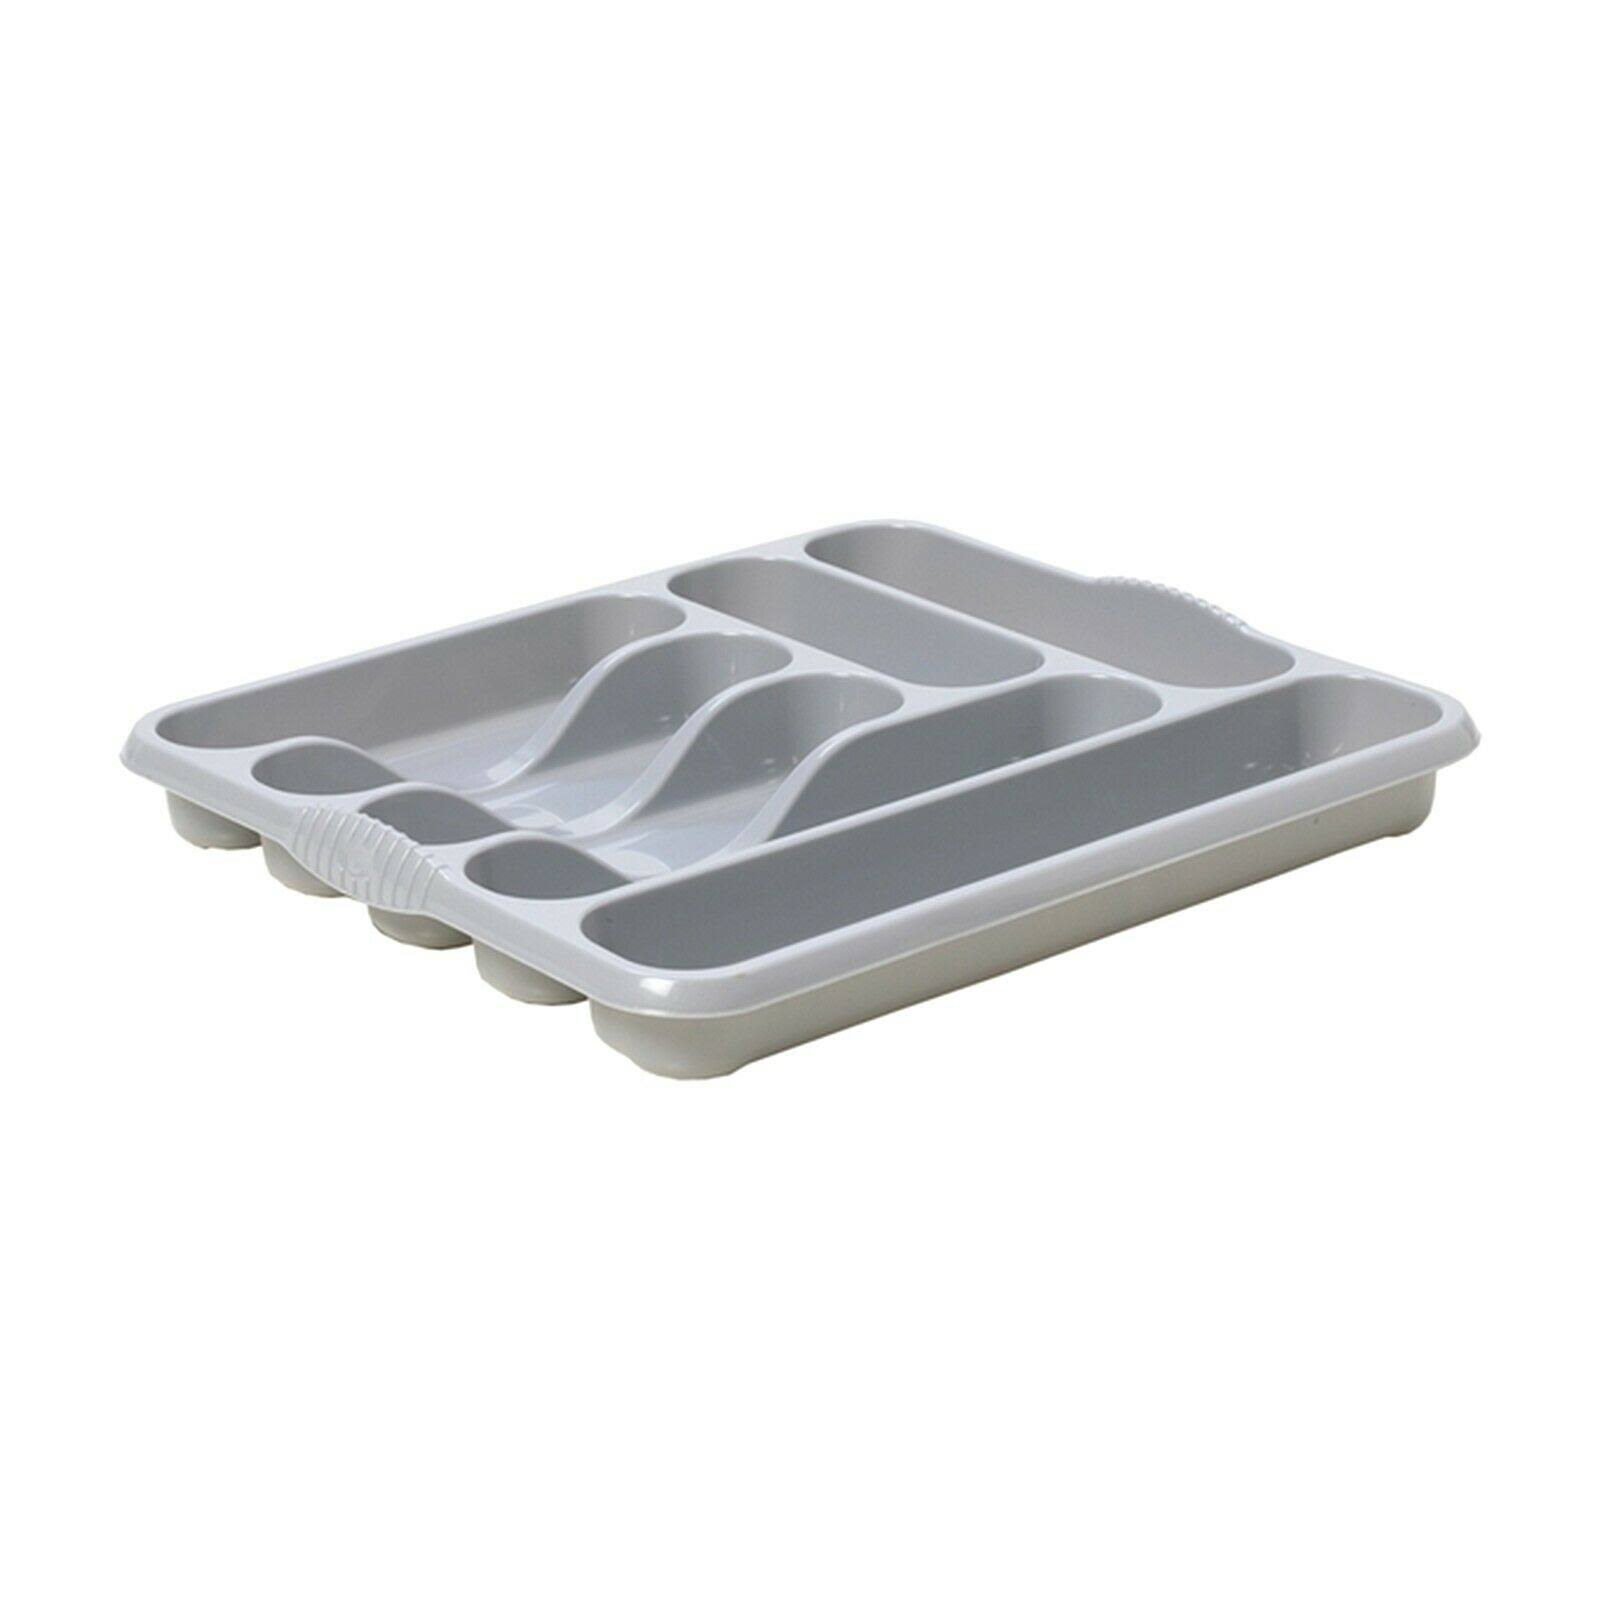 Whatmore 11300 Homewares Cutlery Tray Silver LGE | Storage & Organisation | 30 Day Money Back Guarantee | Free Shipping On All Orders